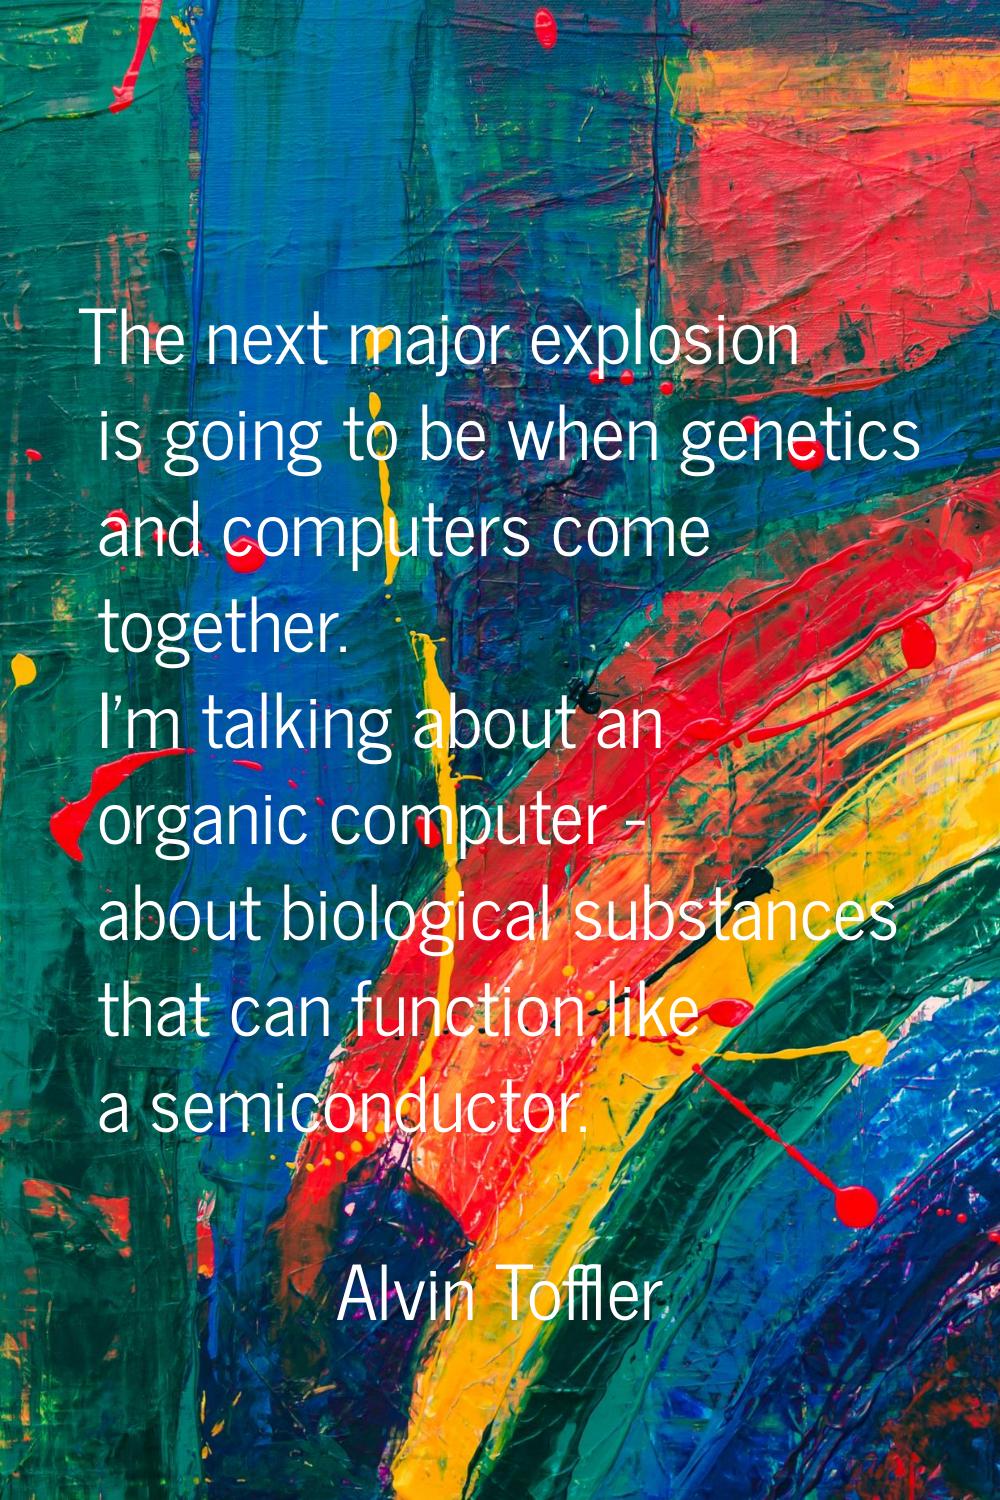 The next major explosion is going to be when genetics and computers come together. I'm talking abou